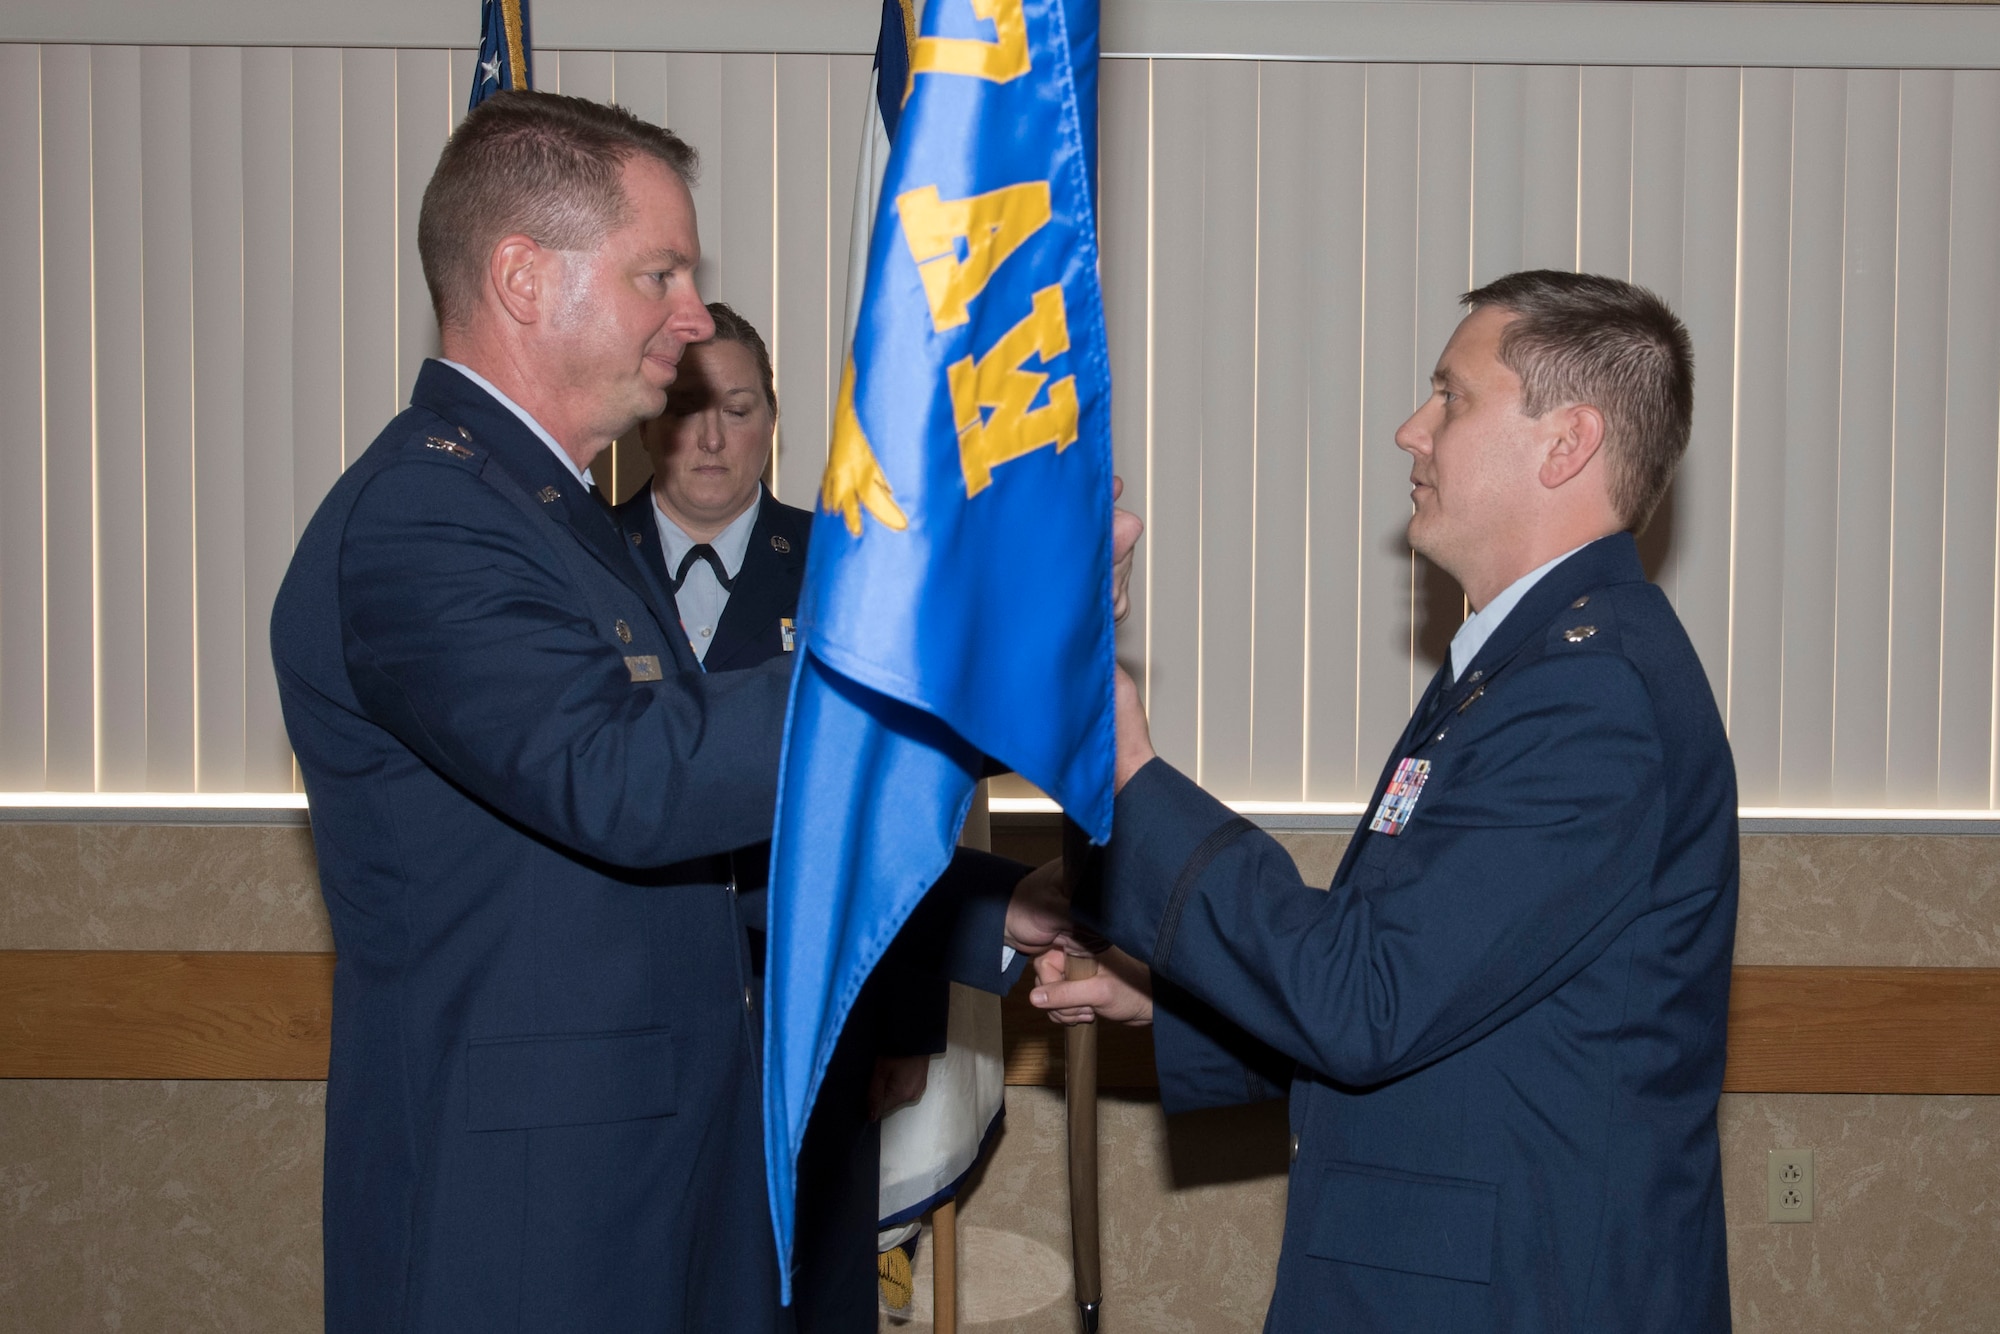 Col. Marty Timko, 167th Operations Group commander, passes the 167th Operations Support Squadron flag to Lt. Col. James Freid-Studlo during the 167 OSS change of command ceremony at the 167th Airlift Wing, Dec. 7, 2019.